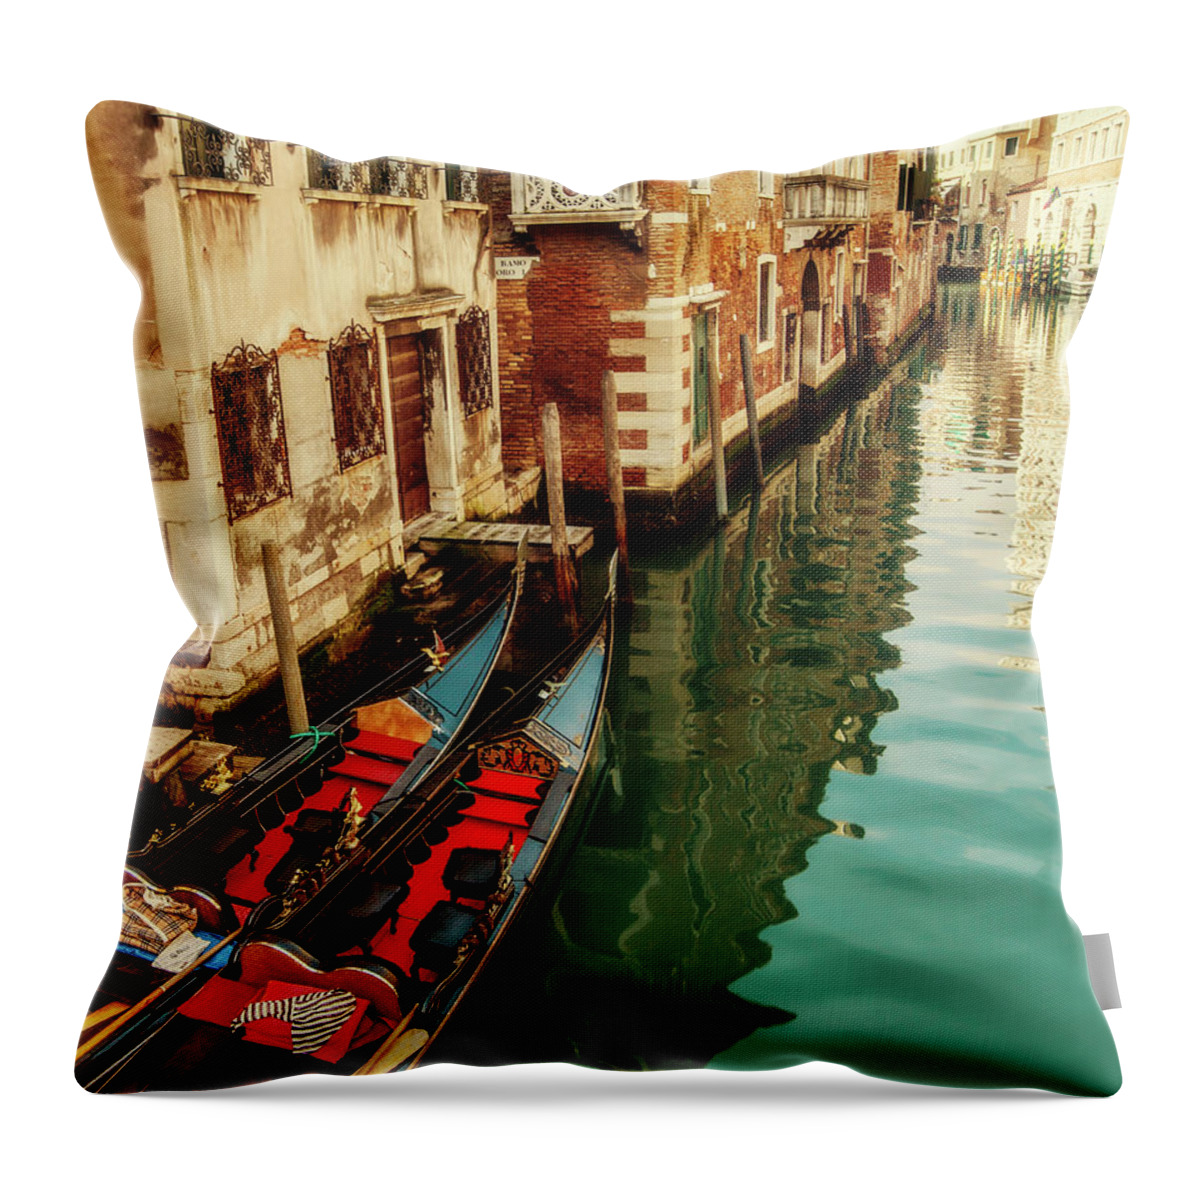 Tranquility Throw Pillow featuring the photograph Gondolas Moored, Sunlit Buildings And by Lesleygooding